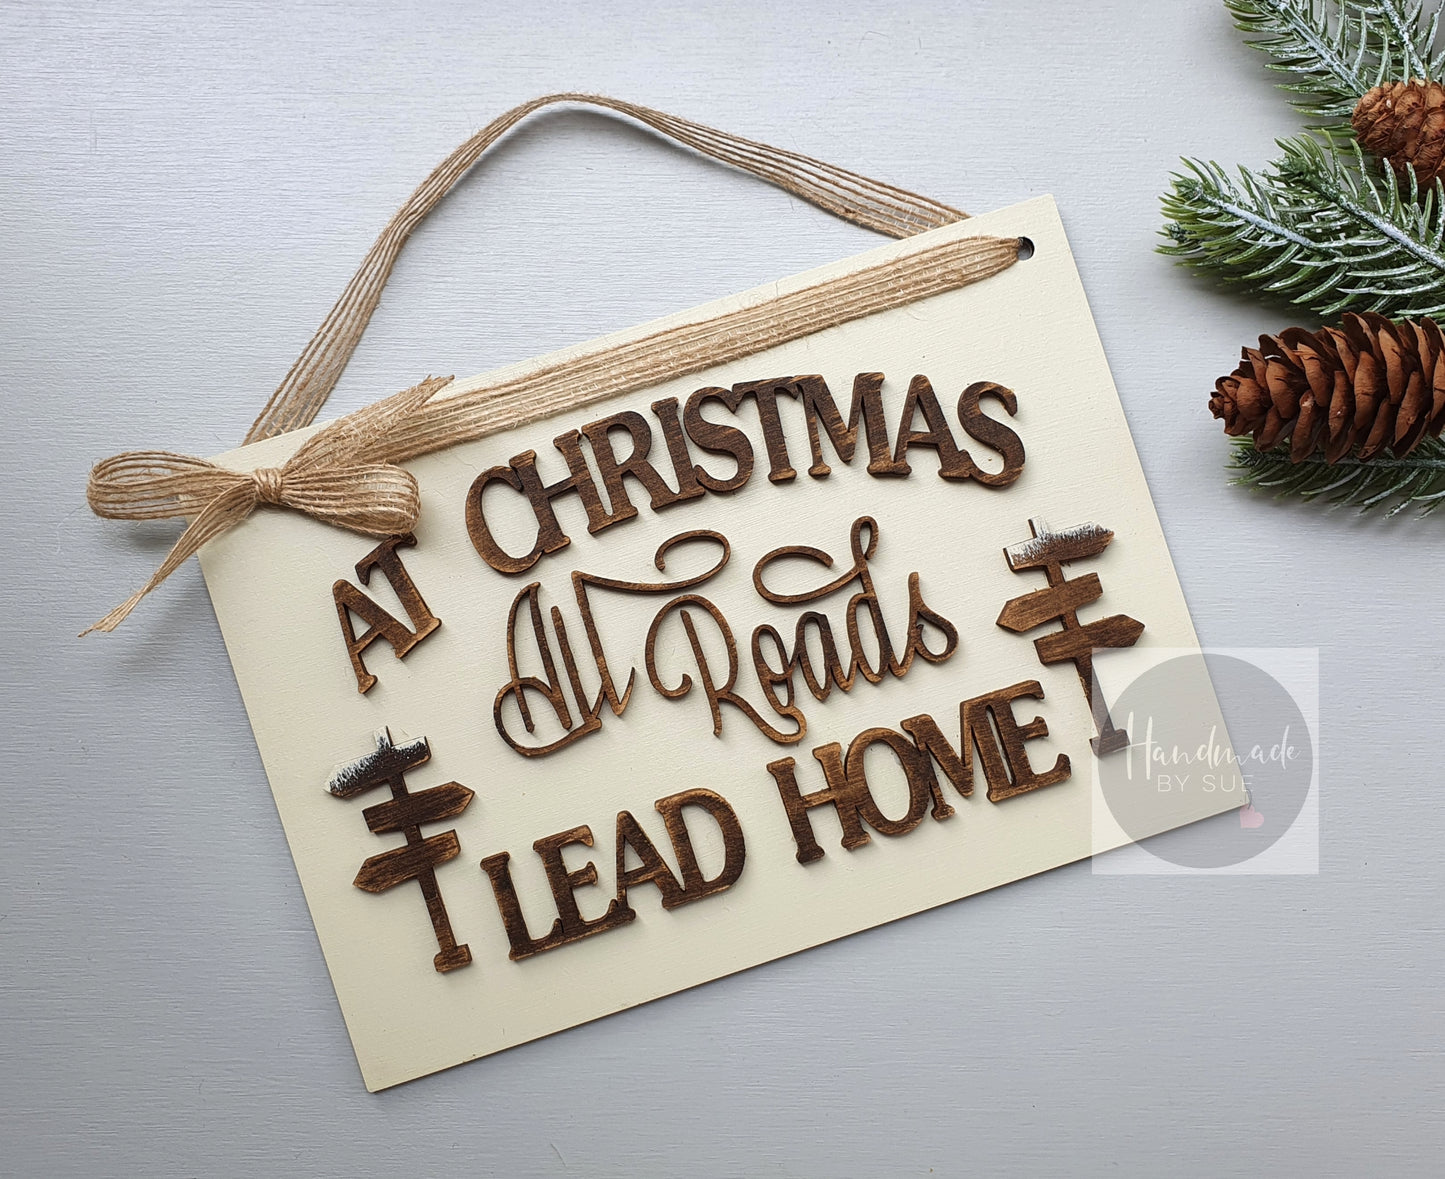 At Christmas All Roads Lead Home Hanging Sign